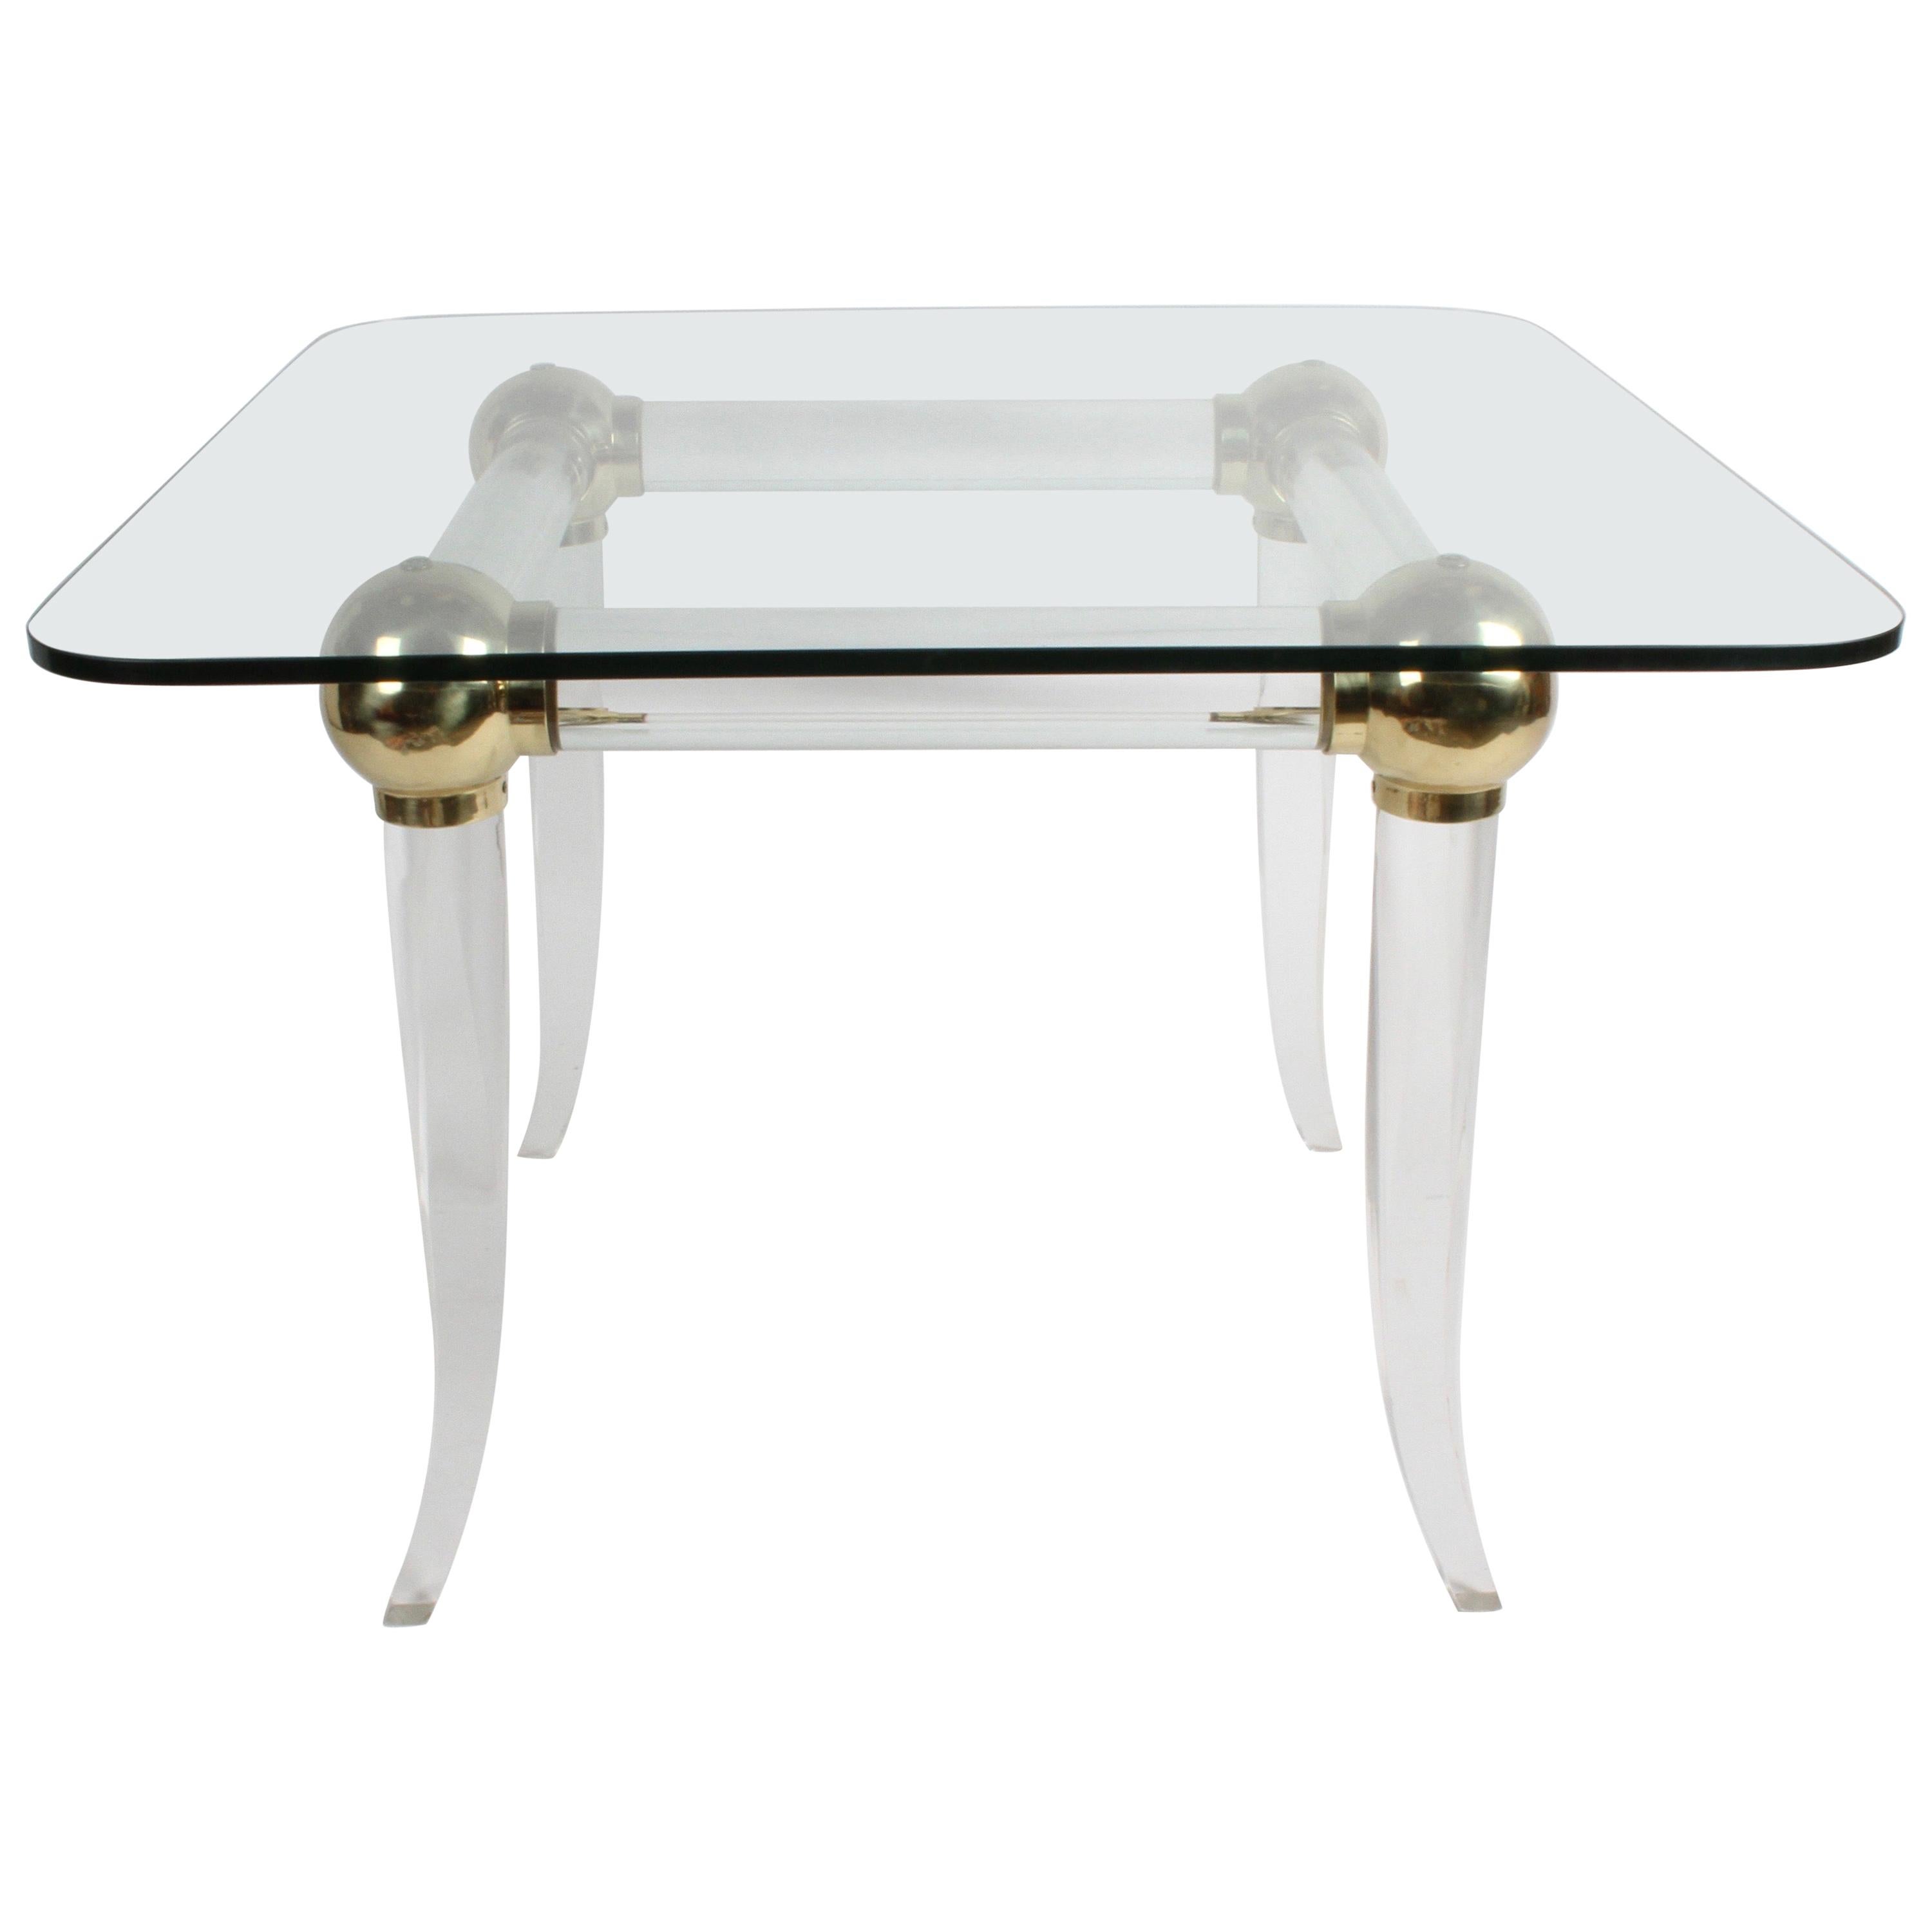 1970s Brass and Lucite Game Table with Glass Top, Four Brass Balls on Saber Legs For Sale